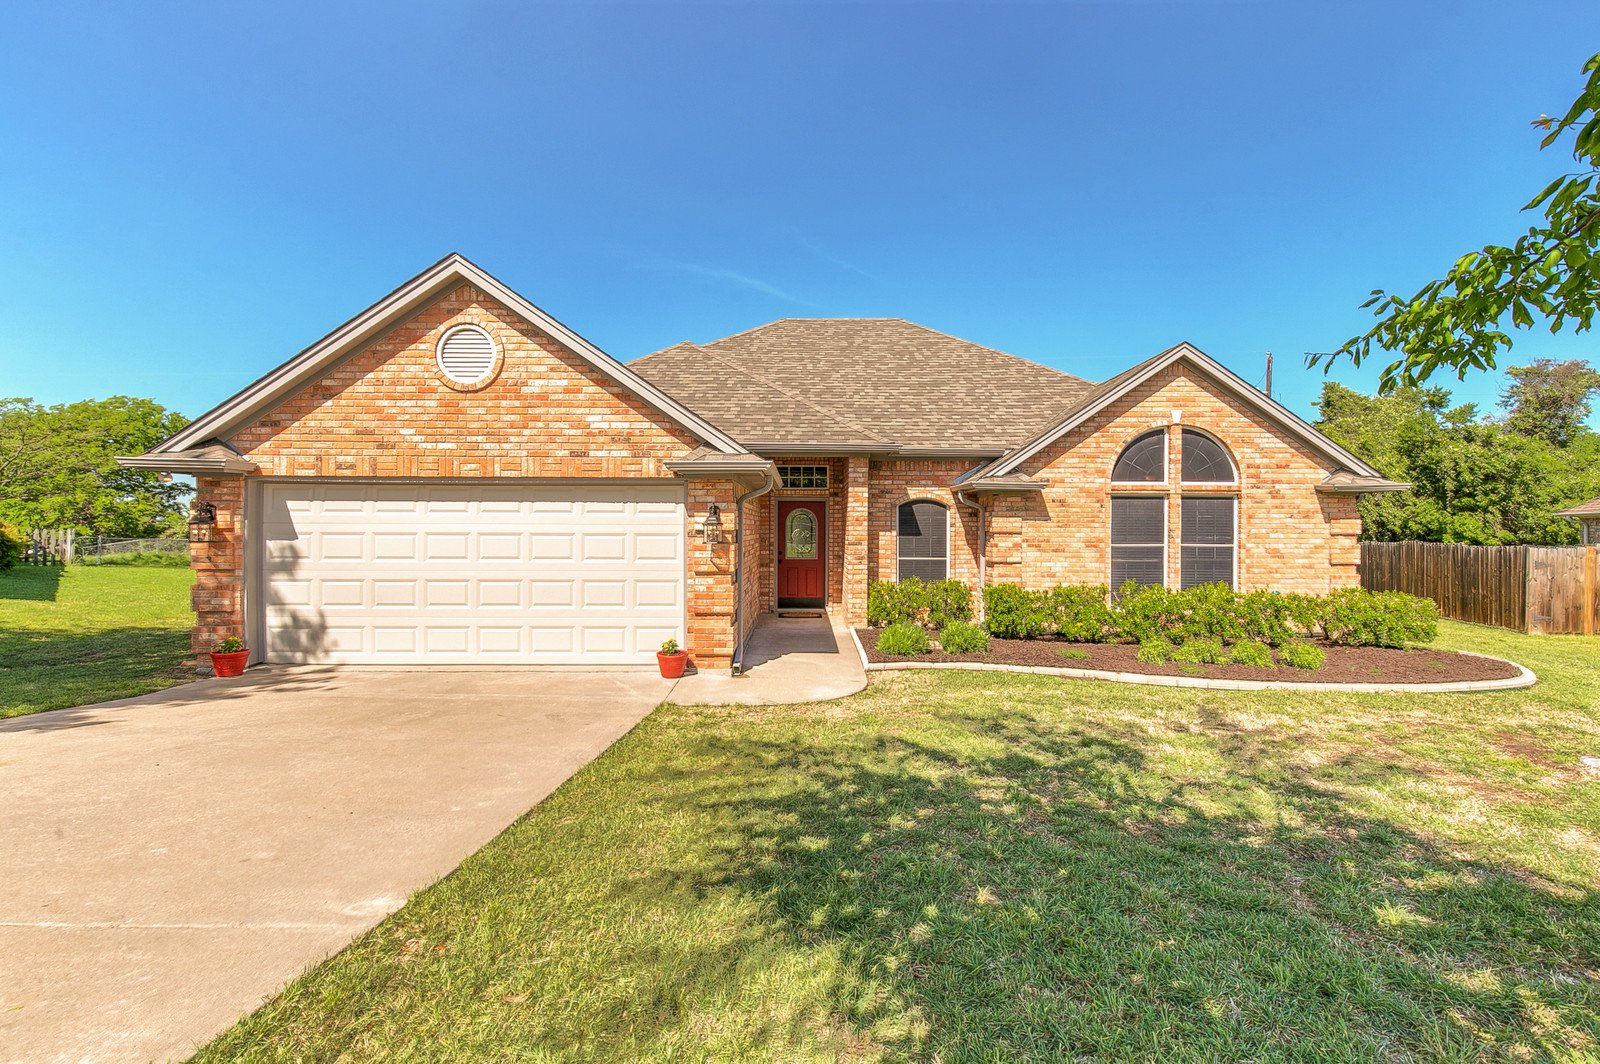 Home for sale weatherford